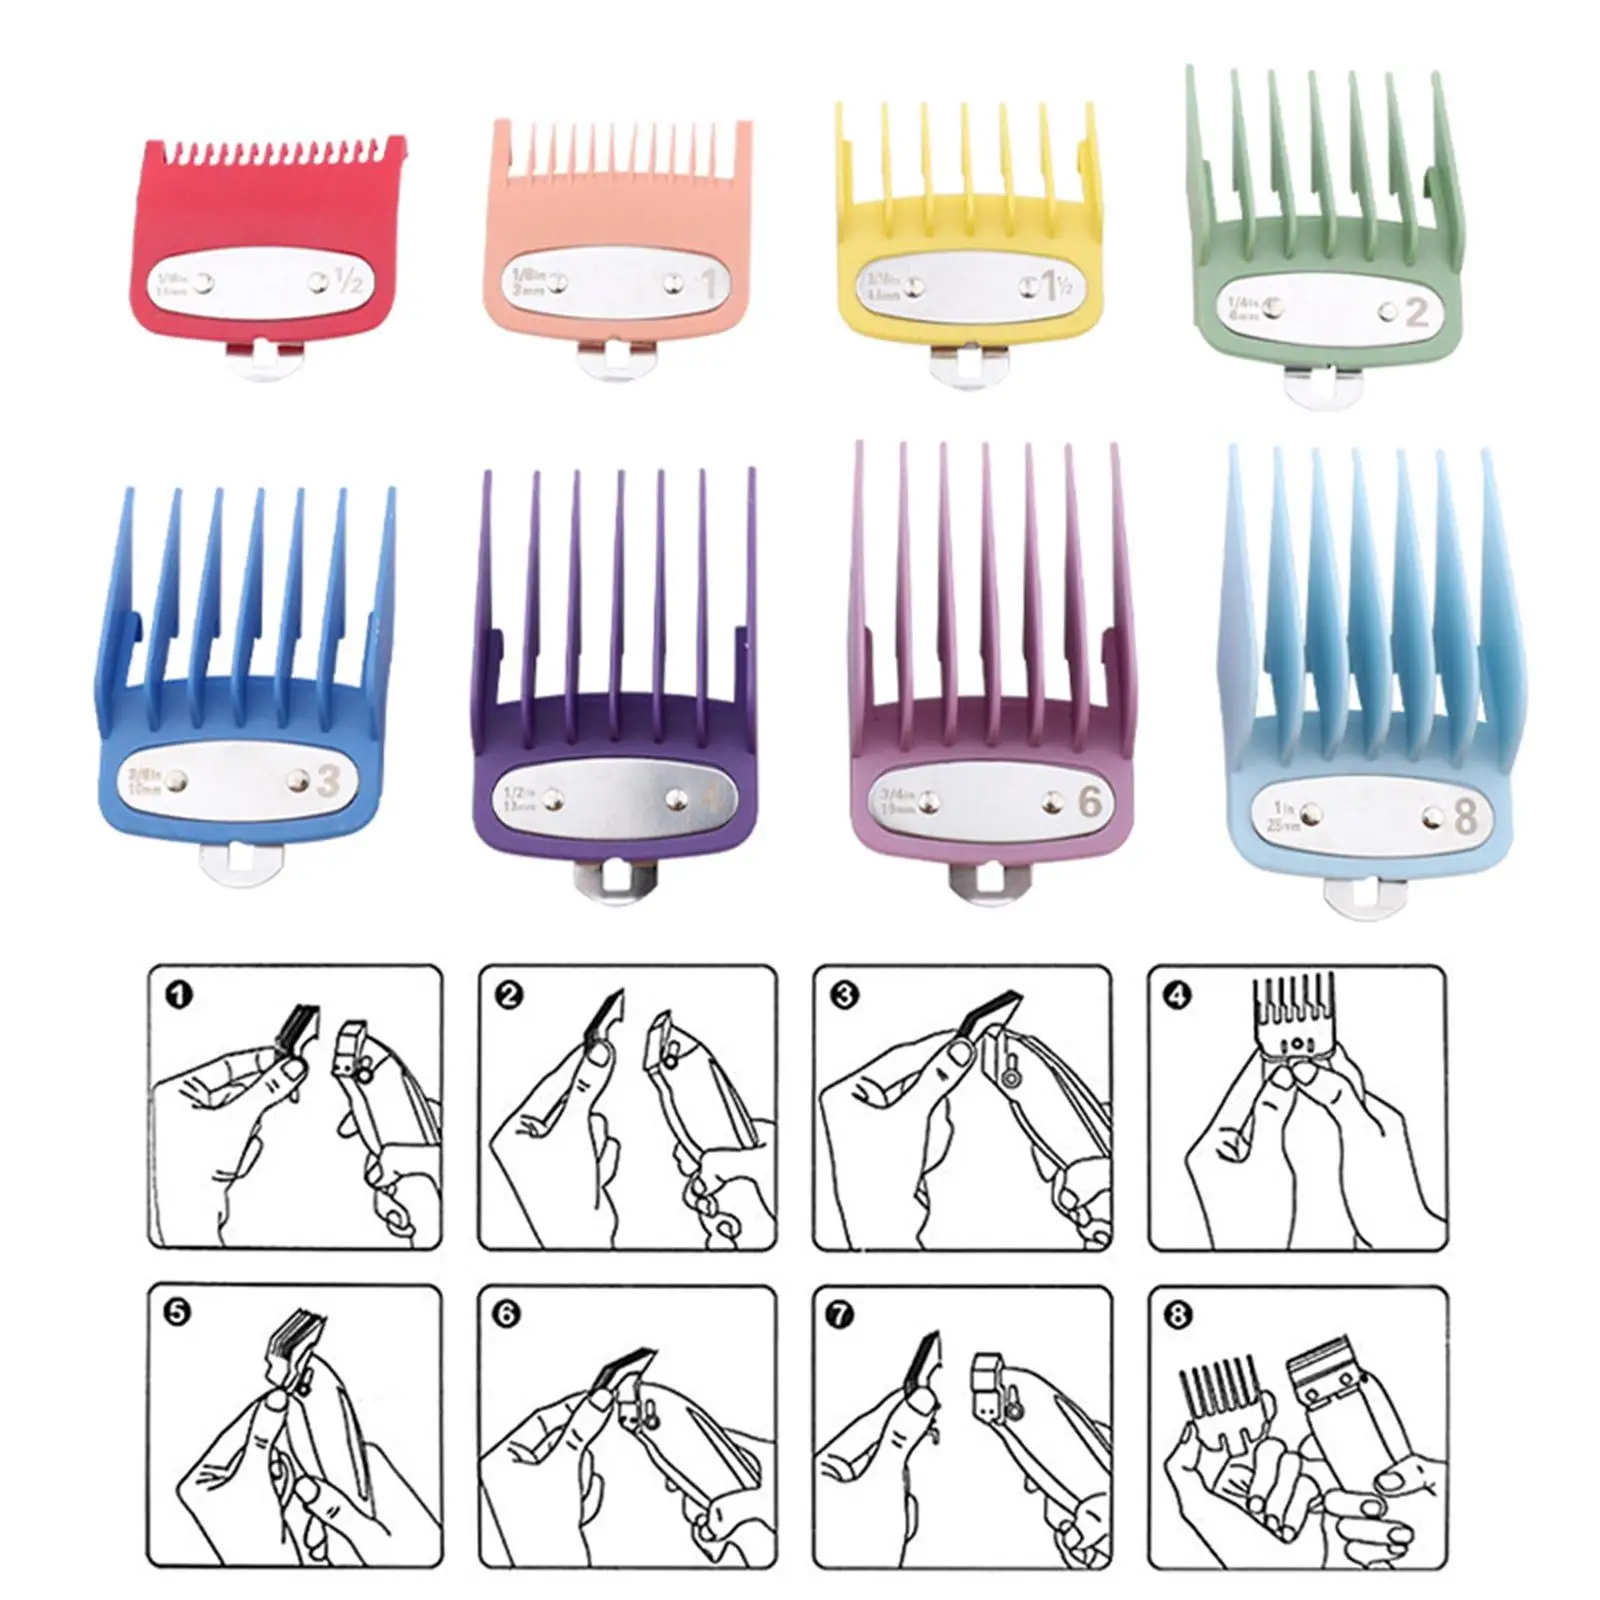 8Pcs Hair Clipper Guards Attachment with Metal Clip from 1/16 inch to 1inch Guide Combs for Wahl Hair Clippers Trimmers Barber